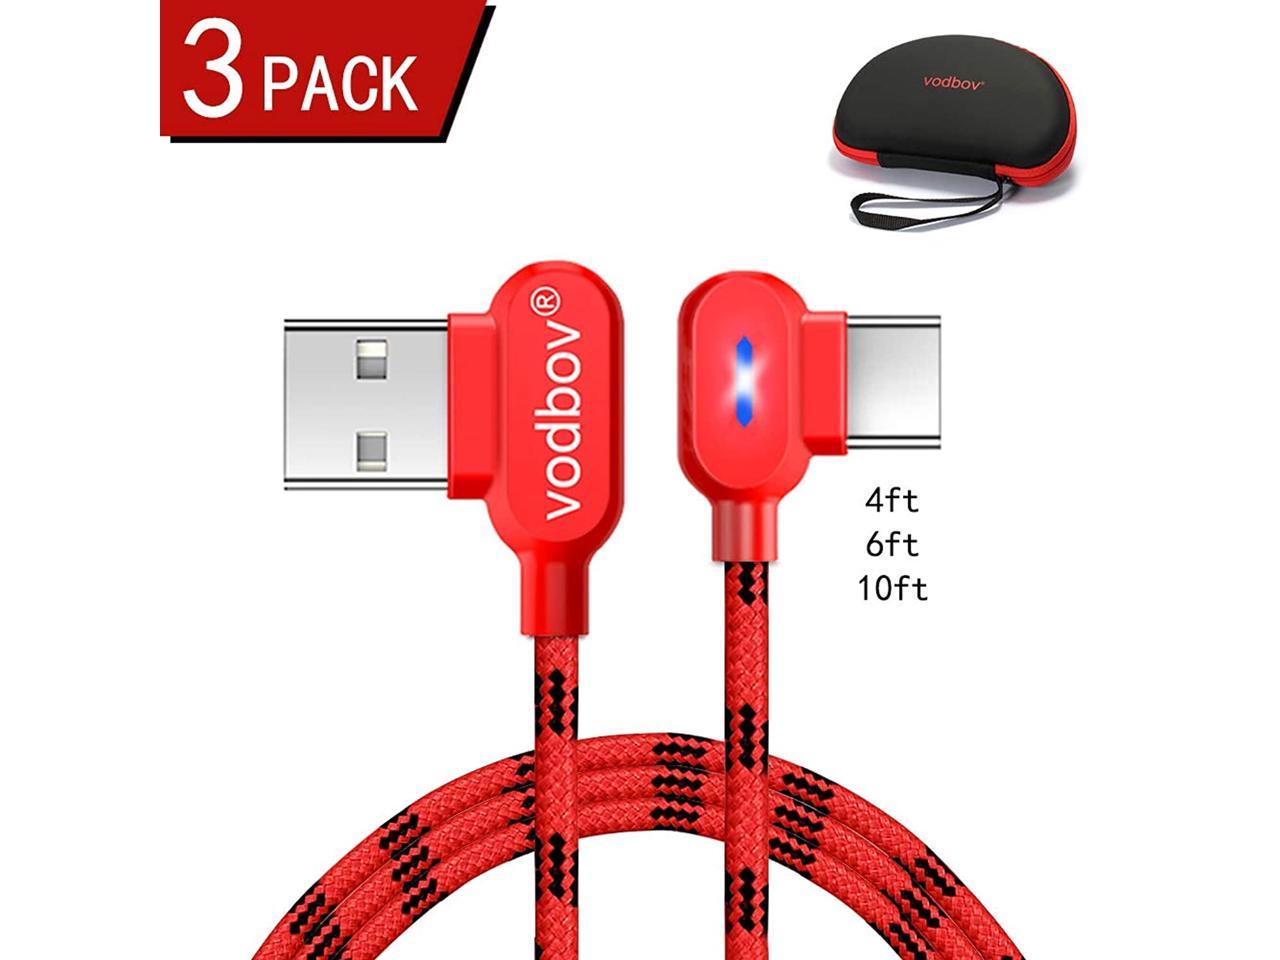 Micro USB Cable USB 90 Degree Fast Charging Data Sync Cable for Samsung Series s7 Edge/s6/s5 Black 4/6/10ft vodbov 3in1 Pack 